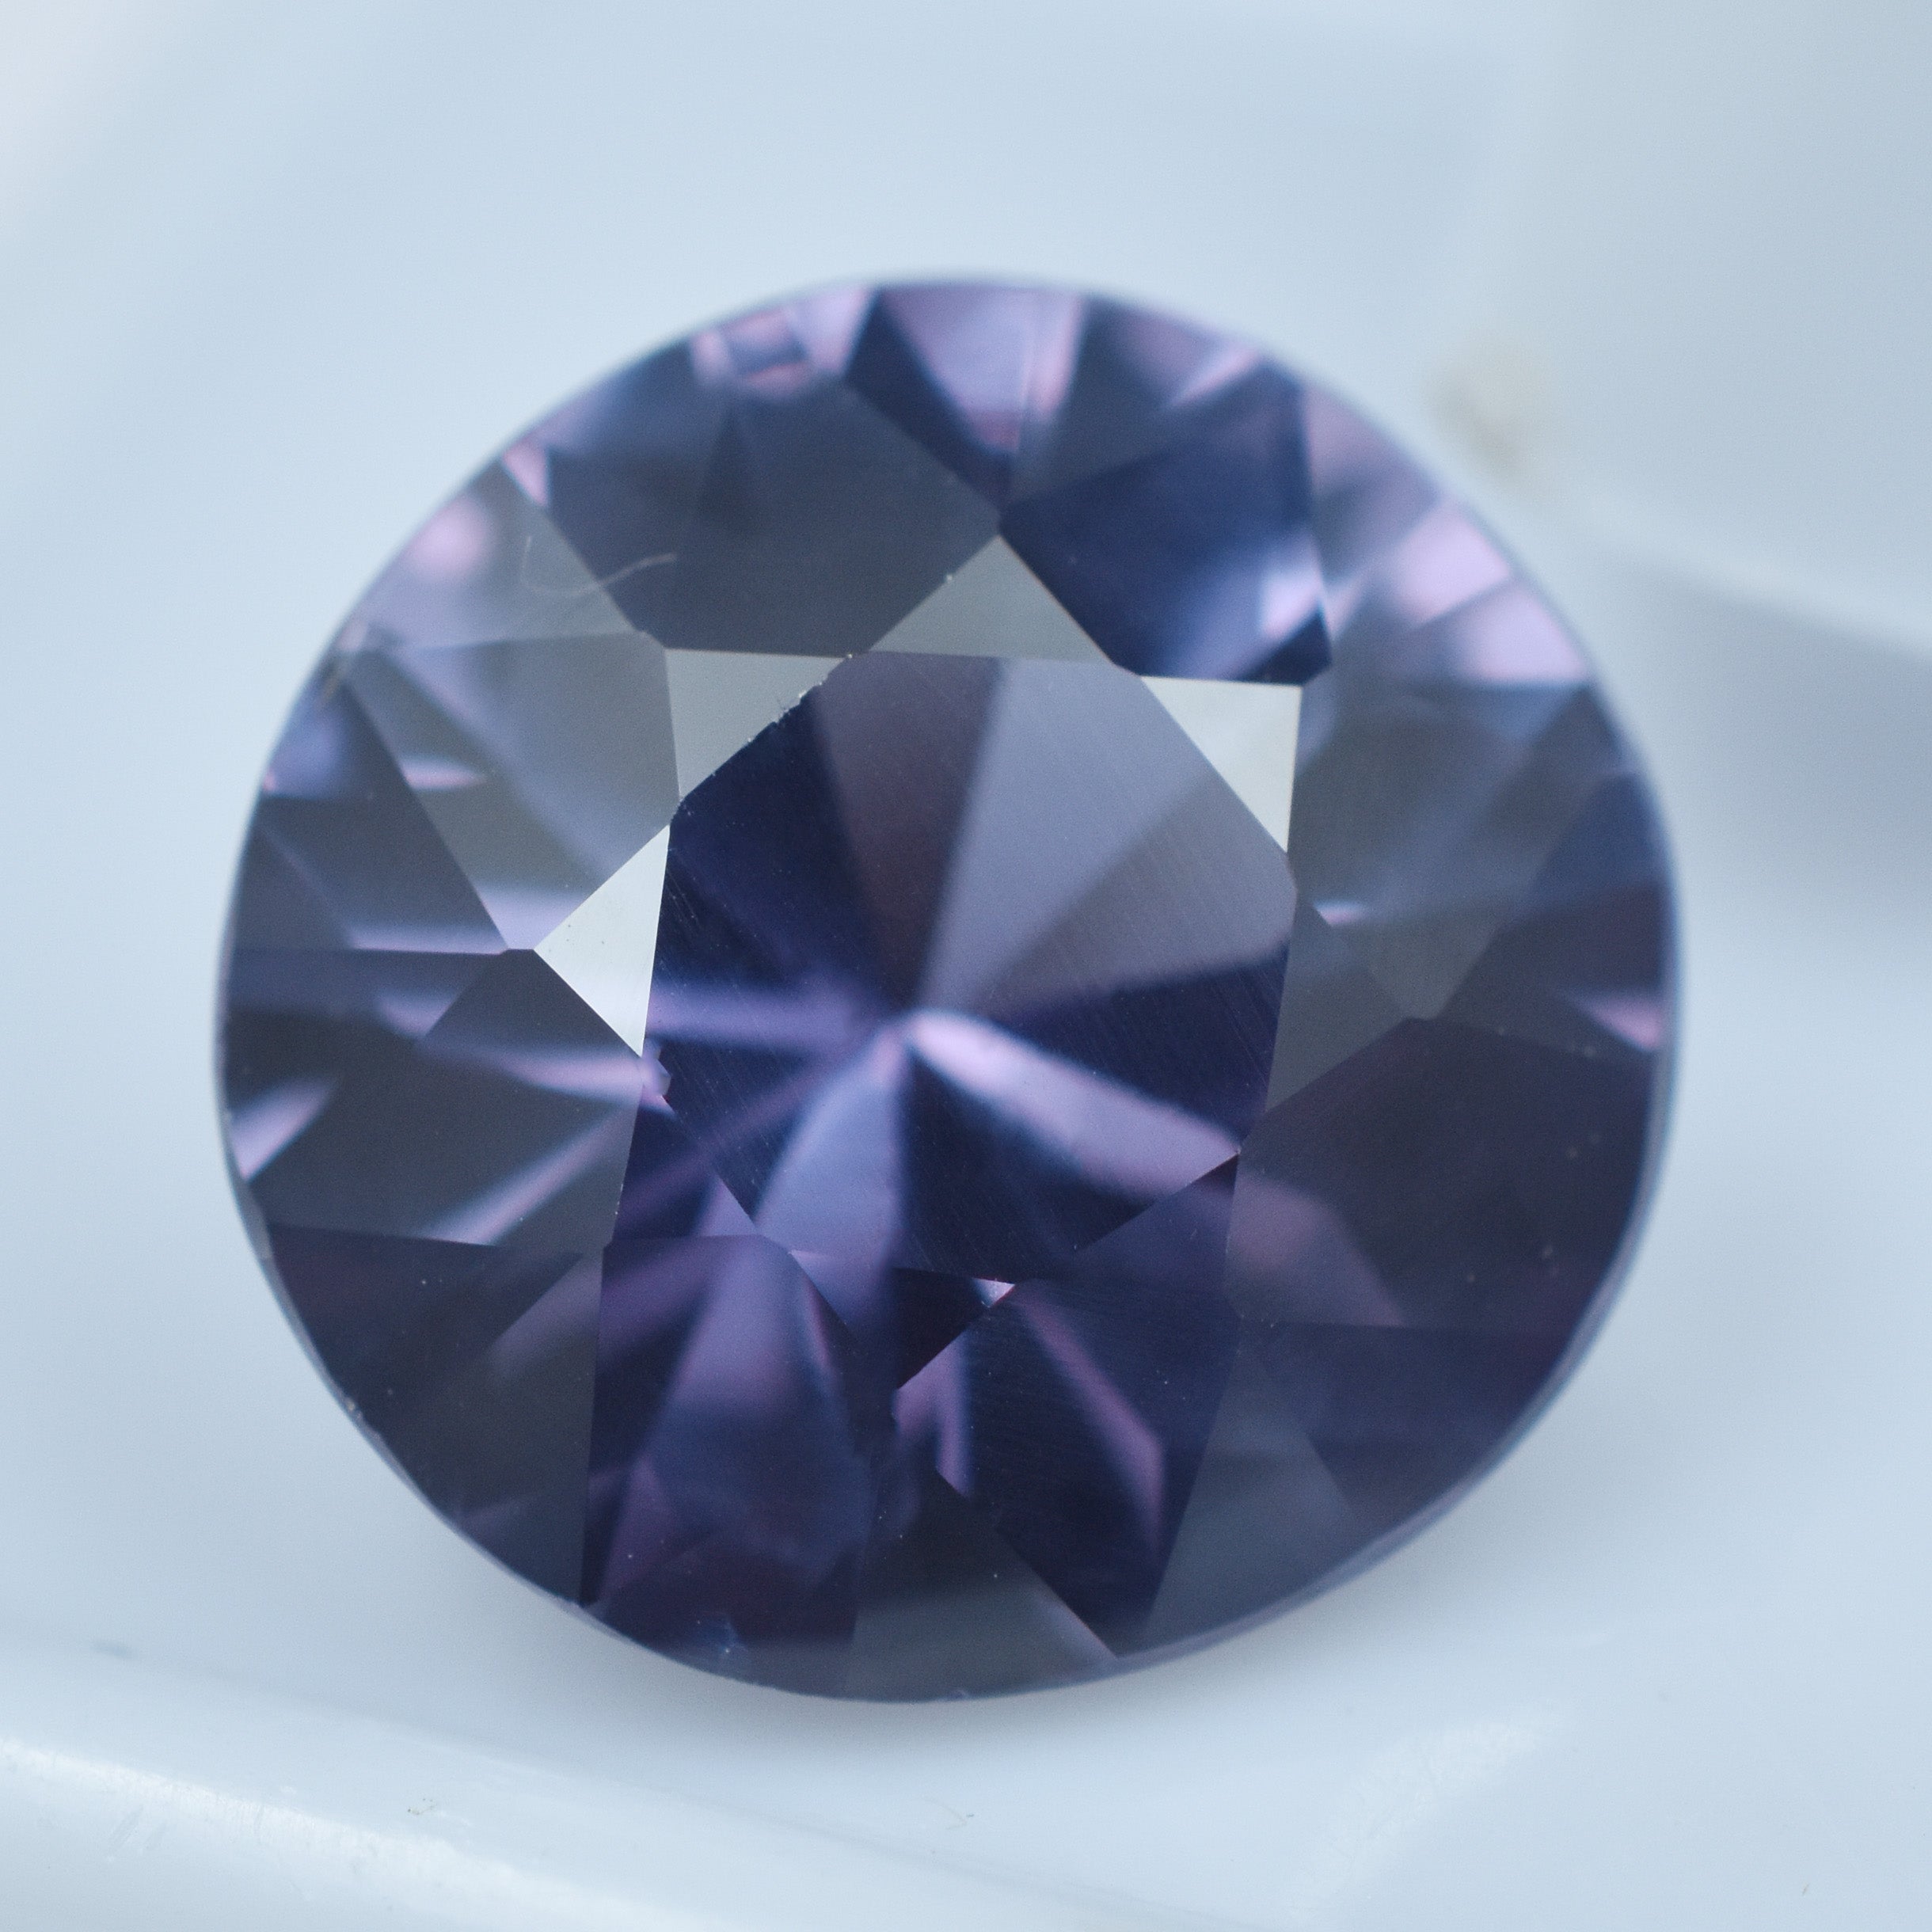 Rare Alexandrite Gem From Russia 7.00 Carat Round Shape Certified Natural Color-Change Alexandrite Loose Gemstone Best For Intuition & Protection